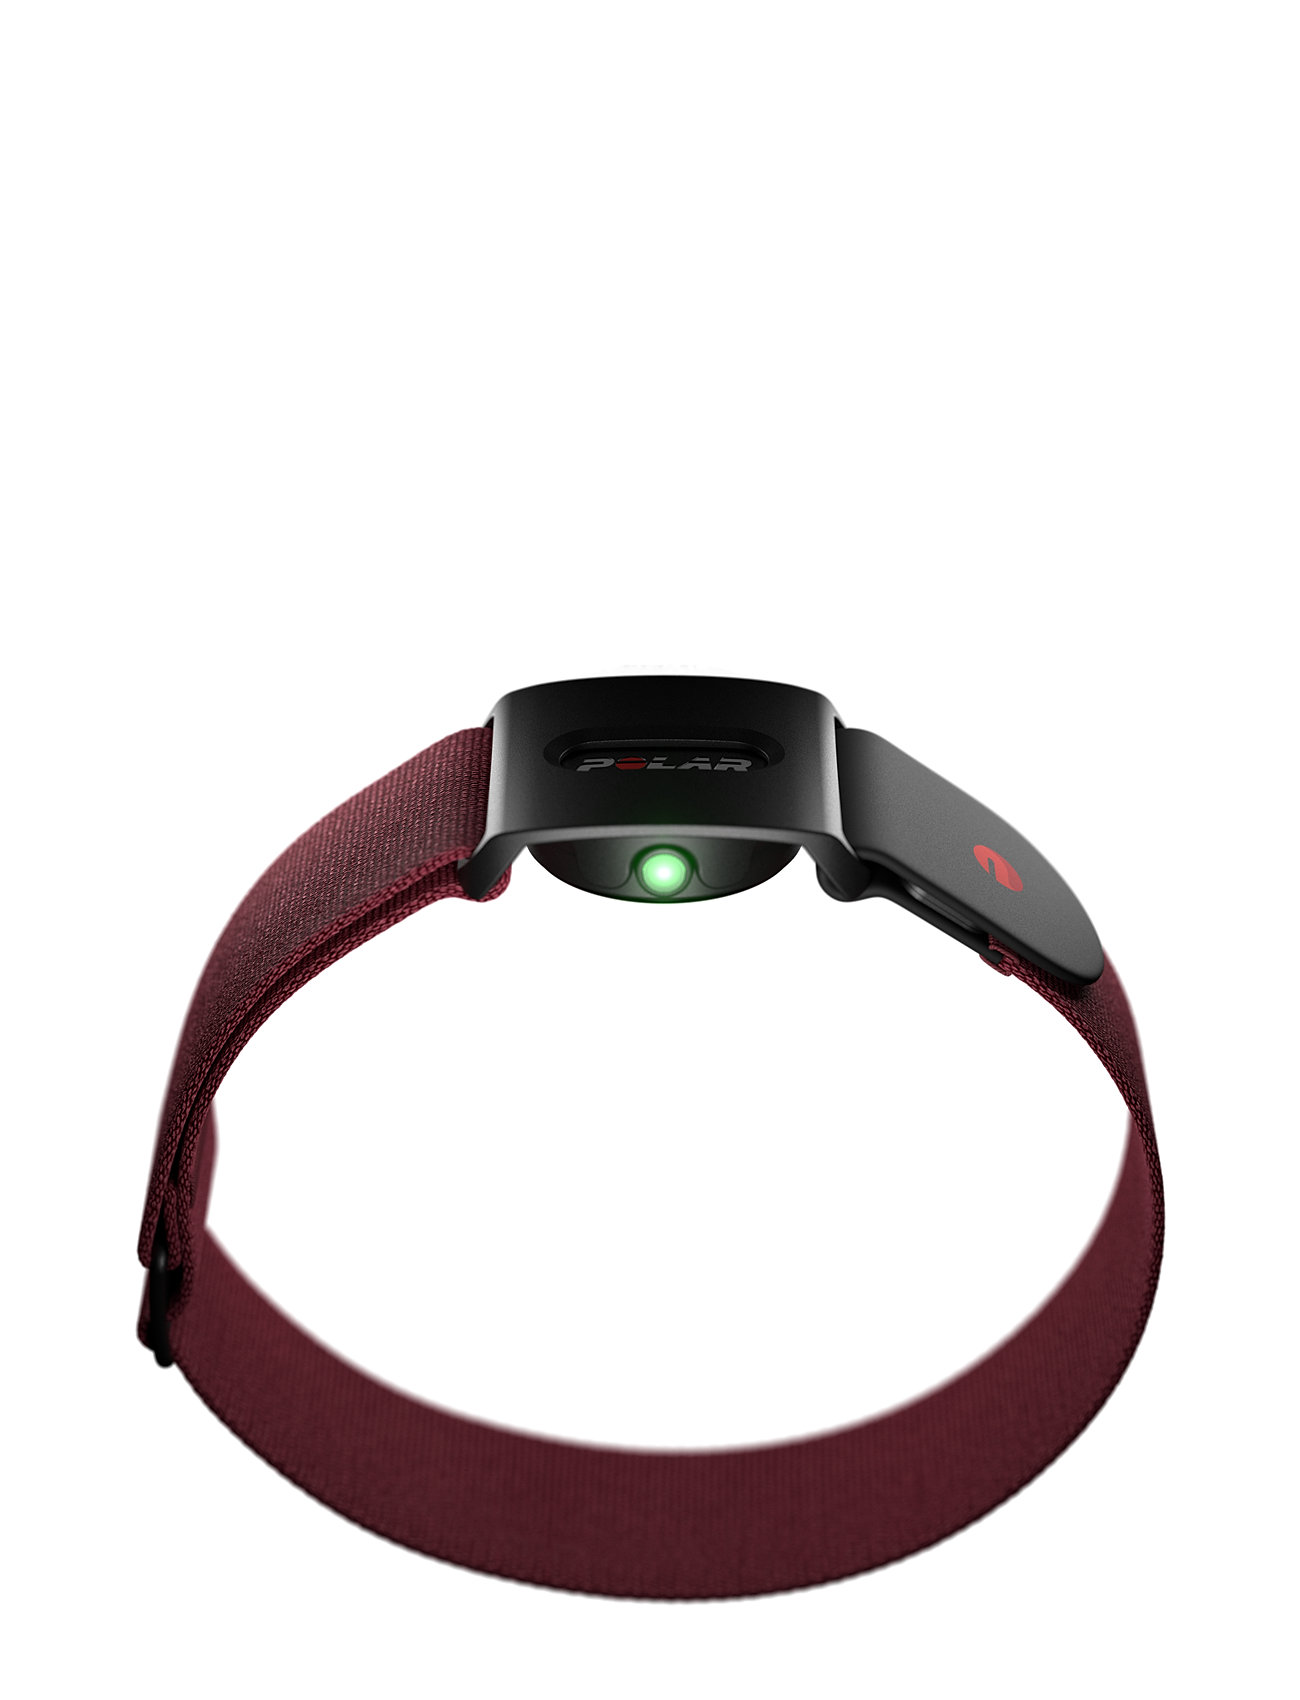 New Polar Verity Sense reads heart rate from arm or temple